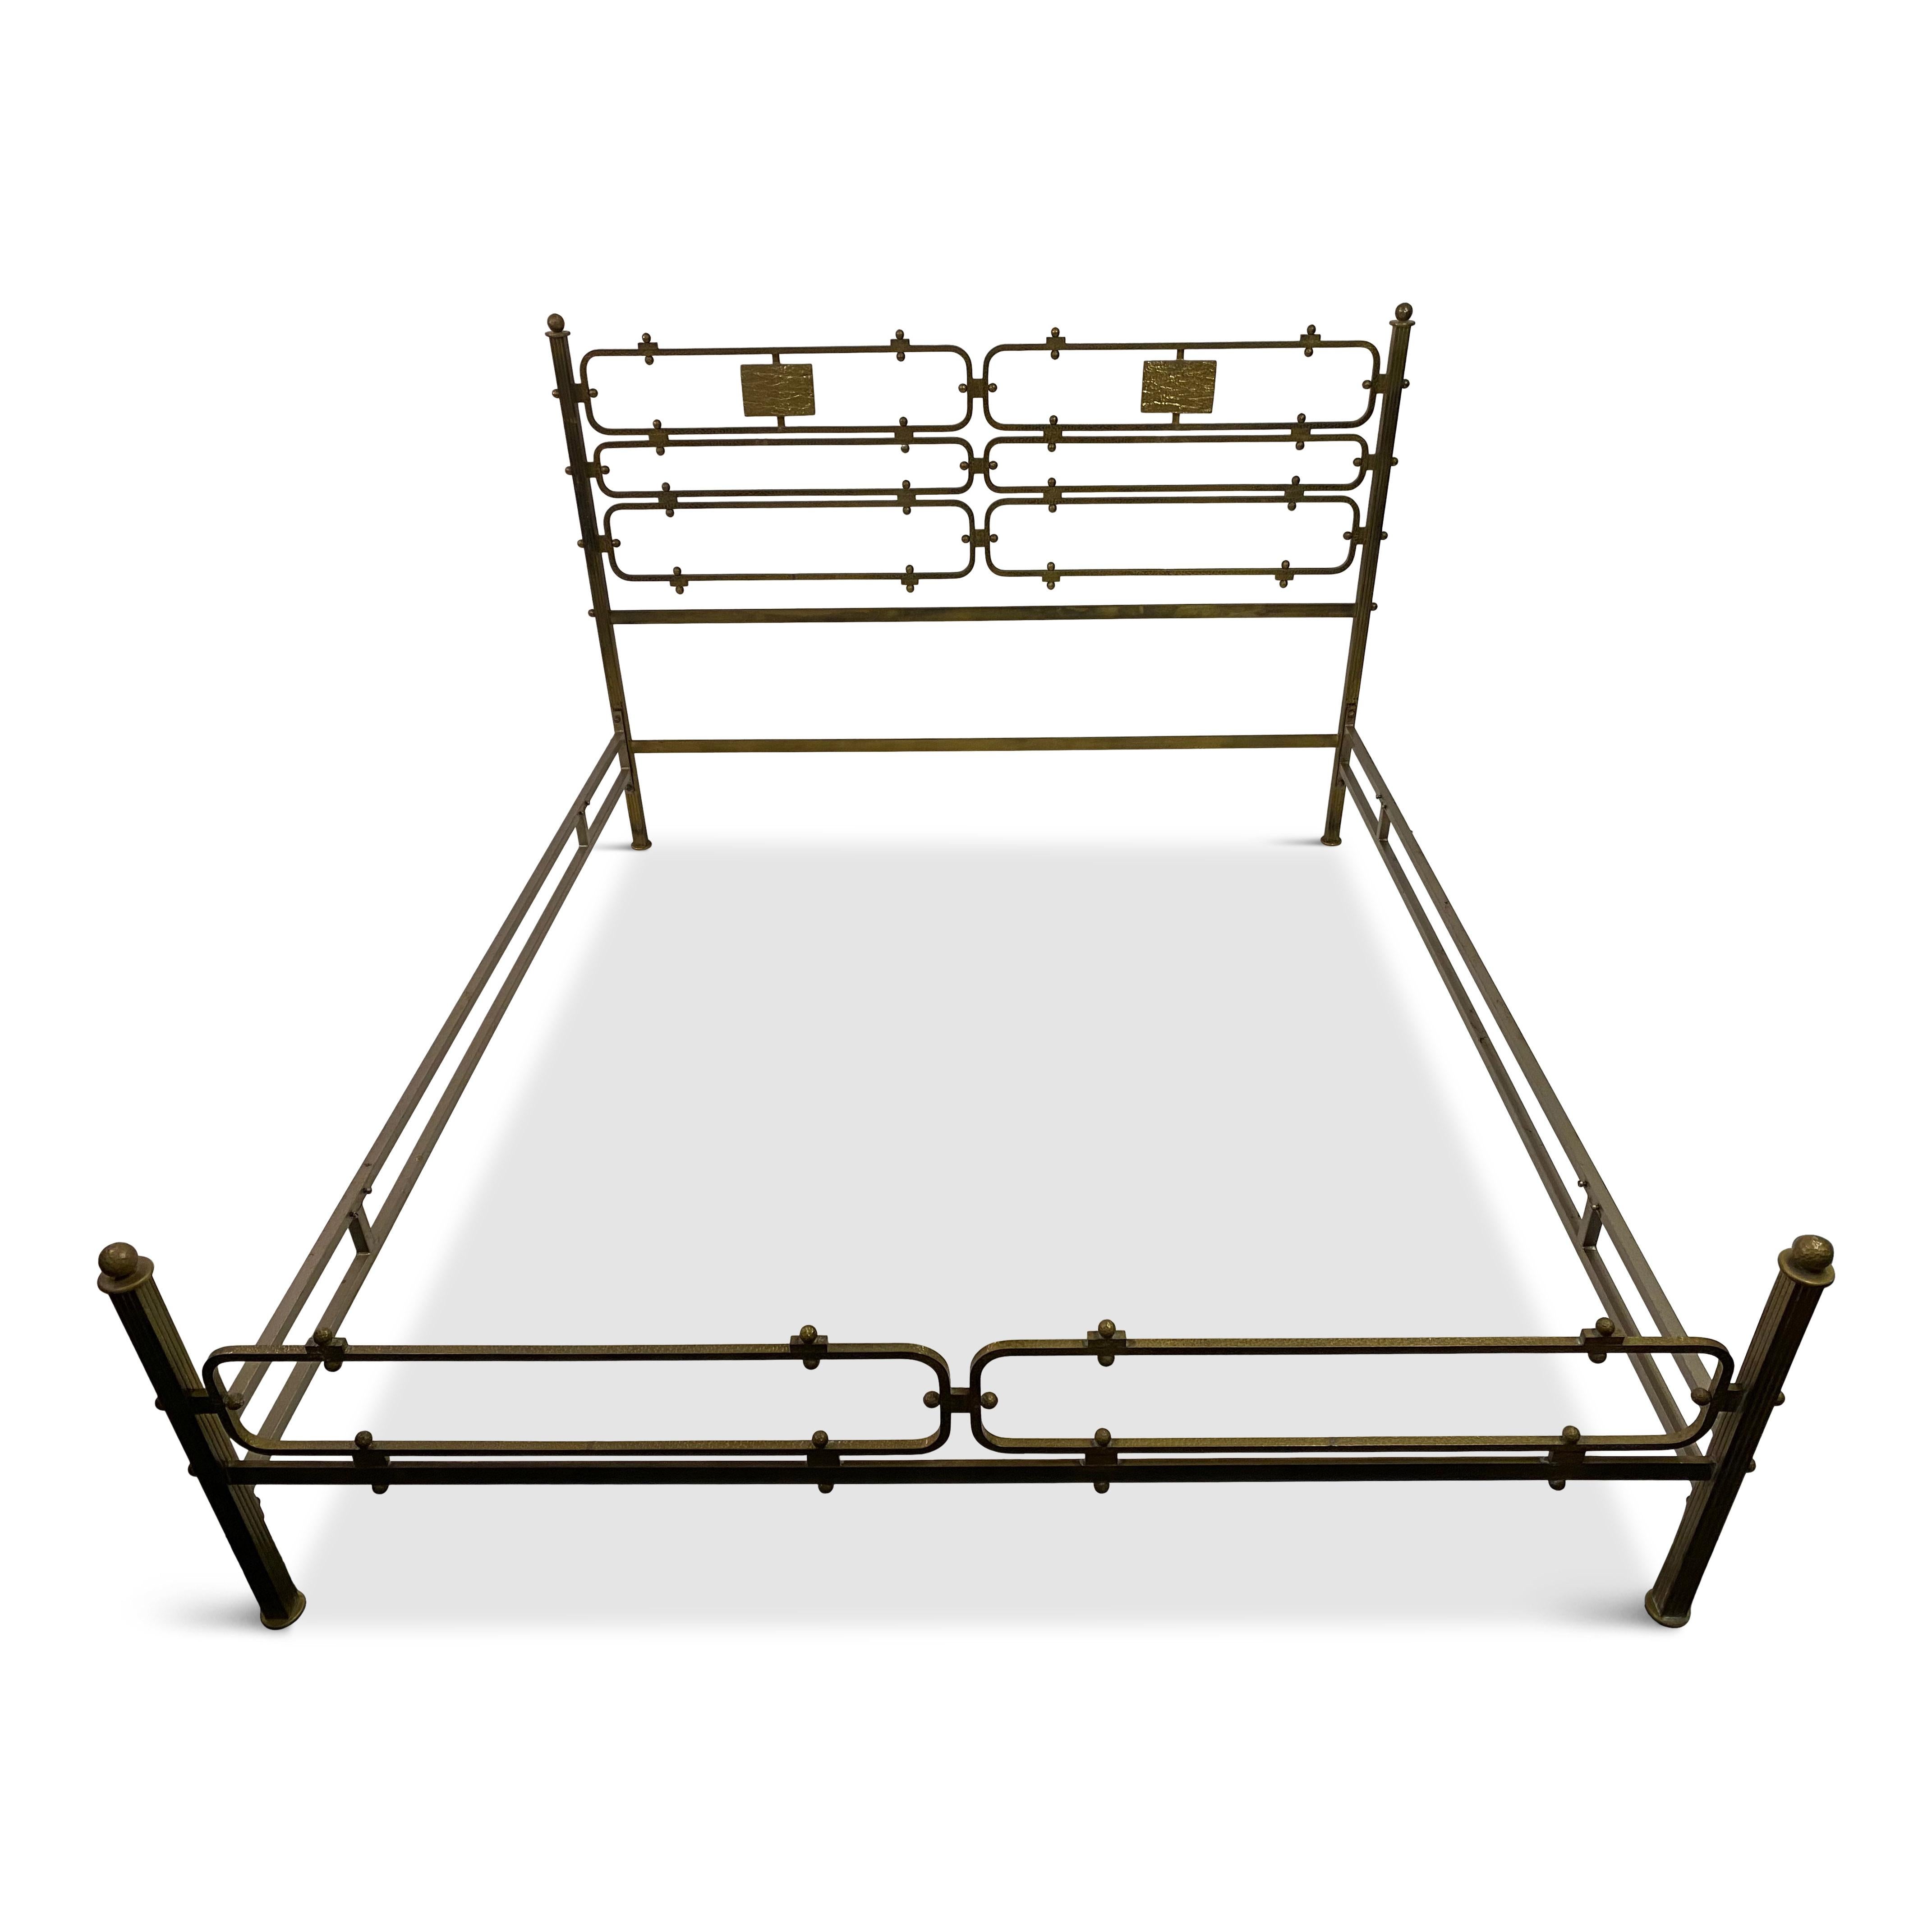 Bed frame.

By Luciano Frigerio.

Brass.

Hammered brass details.

Bed head and foot joined by steel side stretchers.

Internal measurement is 200 x 167 cm.

1970s Italian.